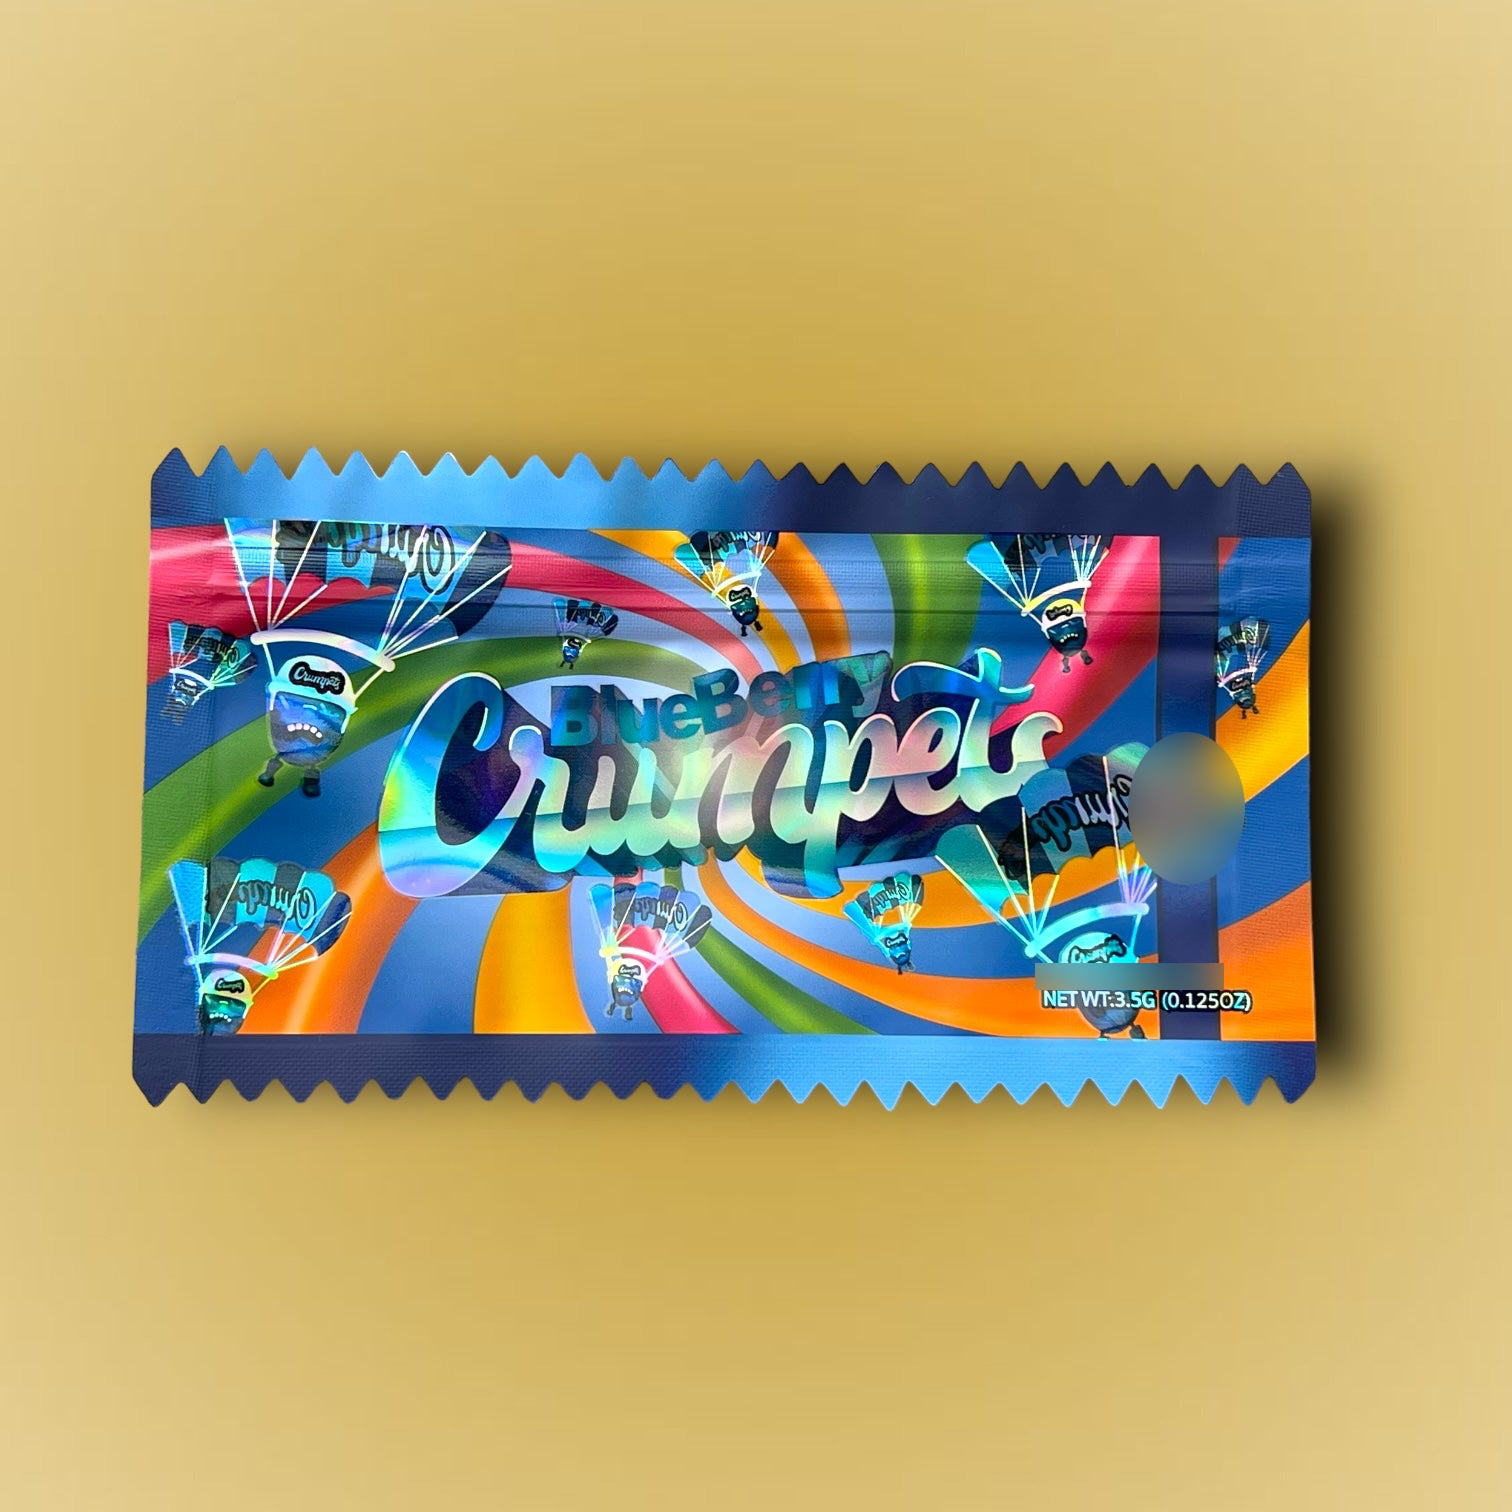 Blueberry Crumpet 3.5G Mylar Bag Holographic- Packaging Only